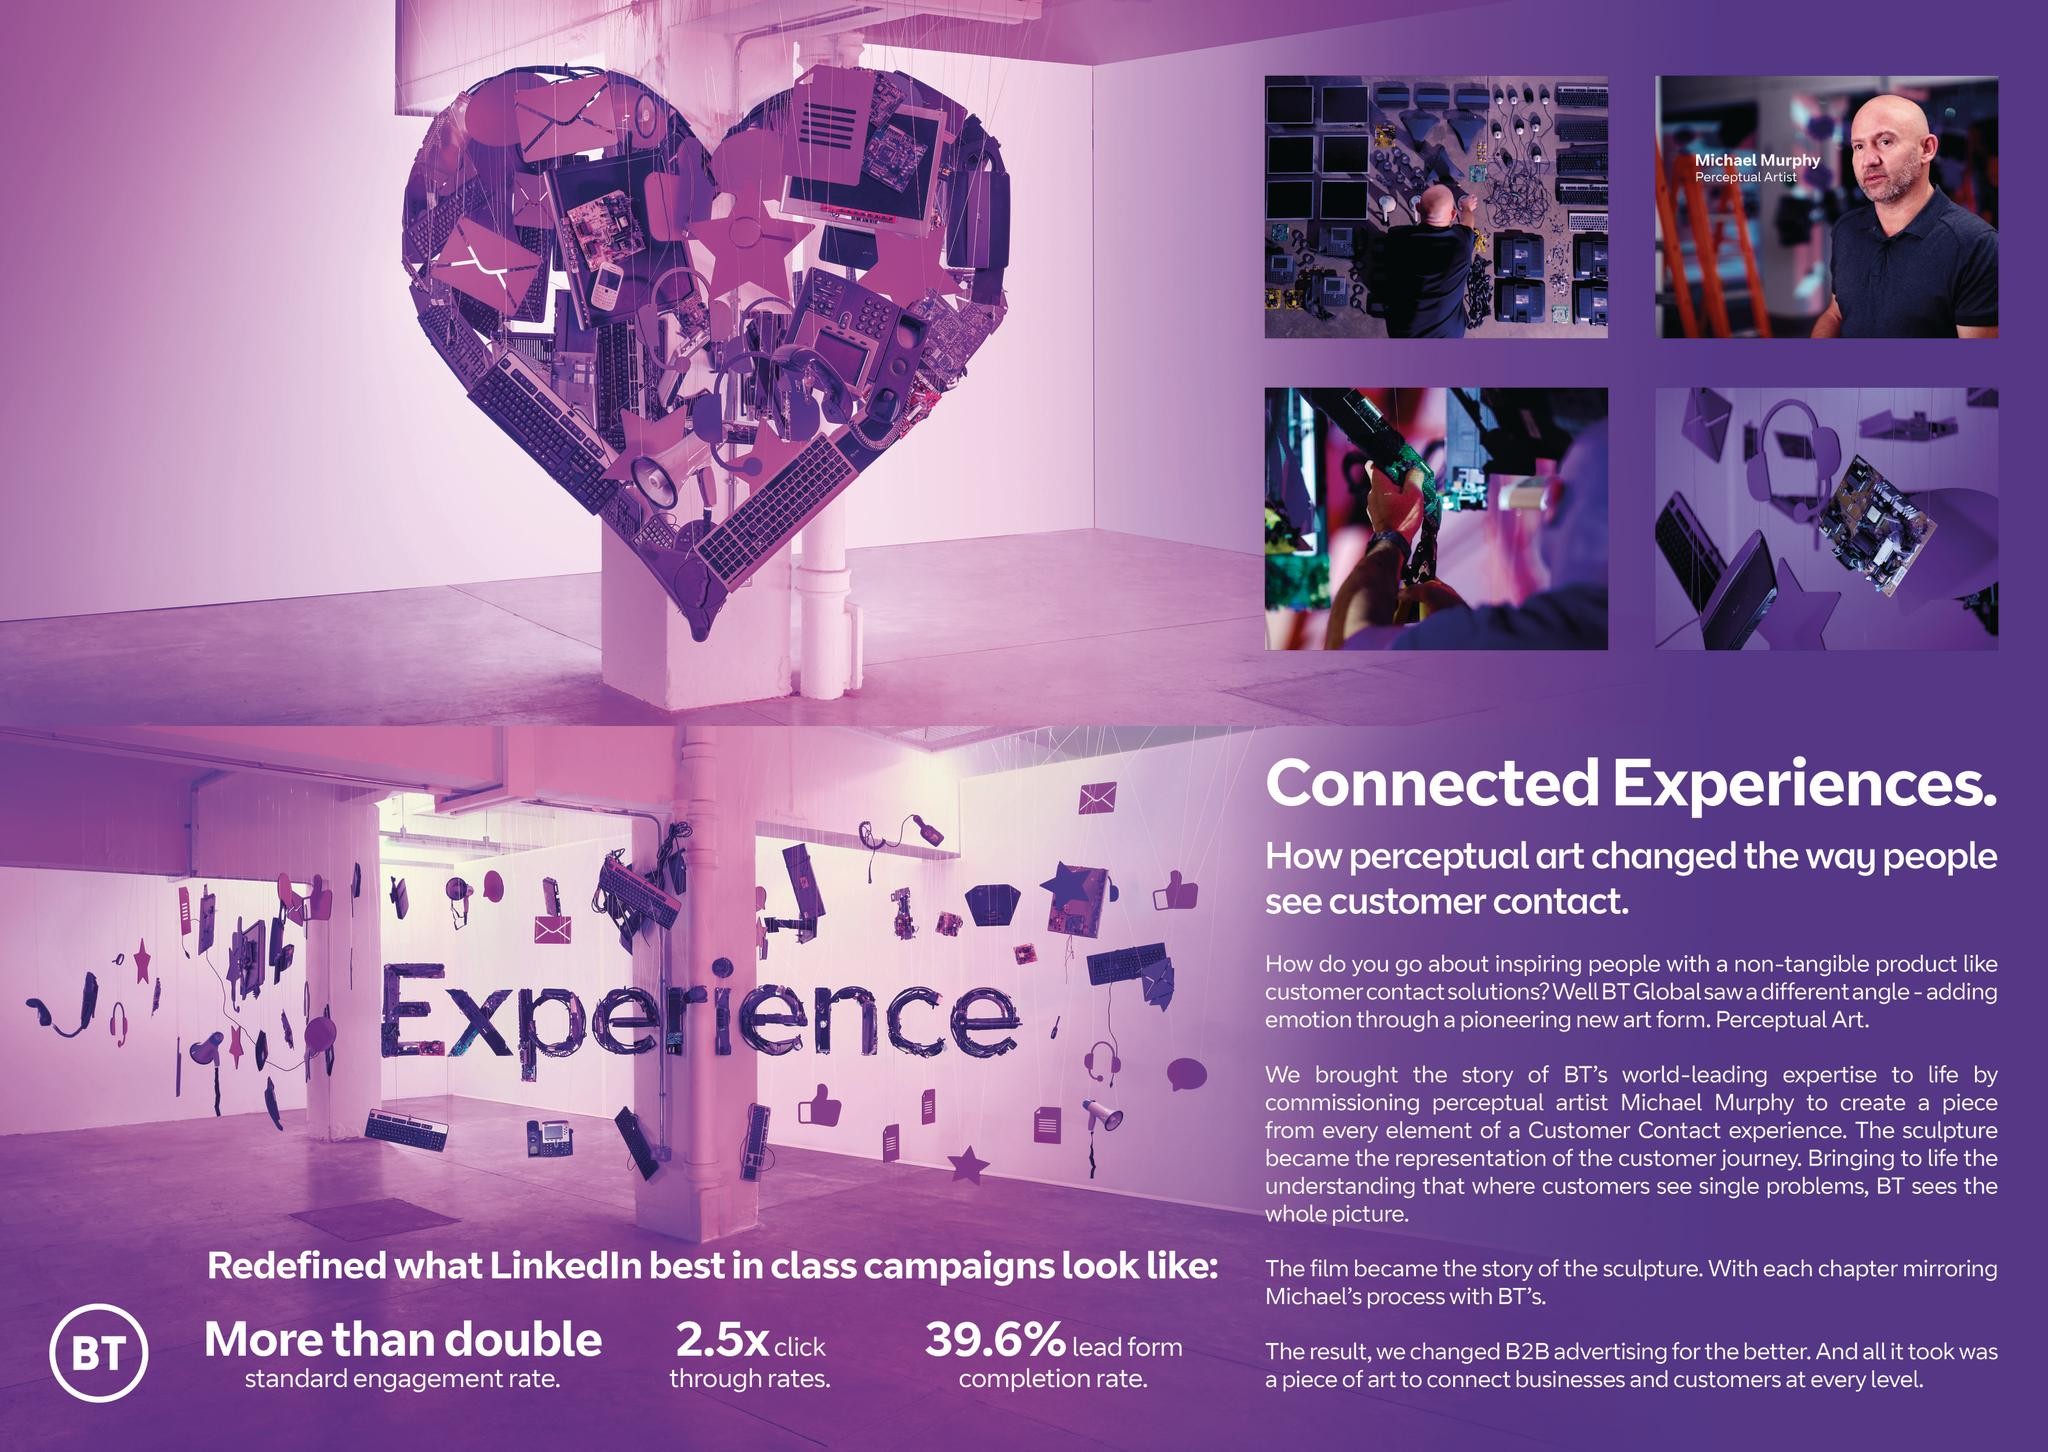 Connected Experiences